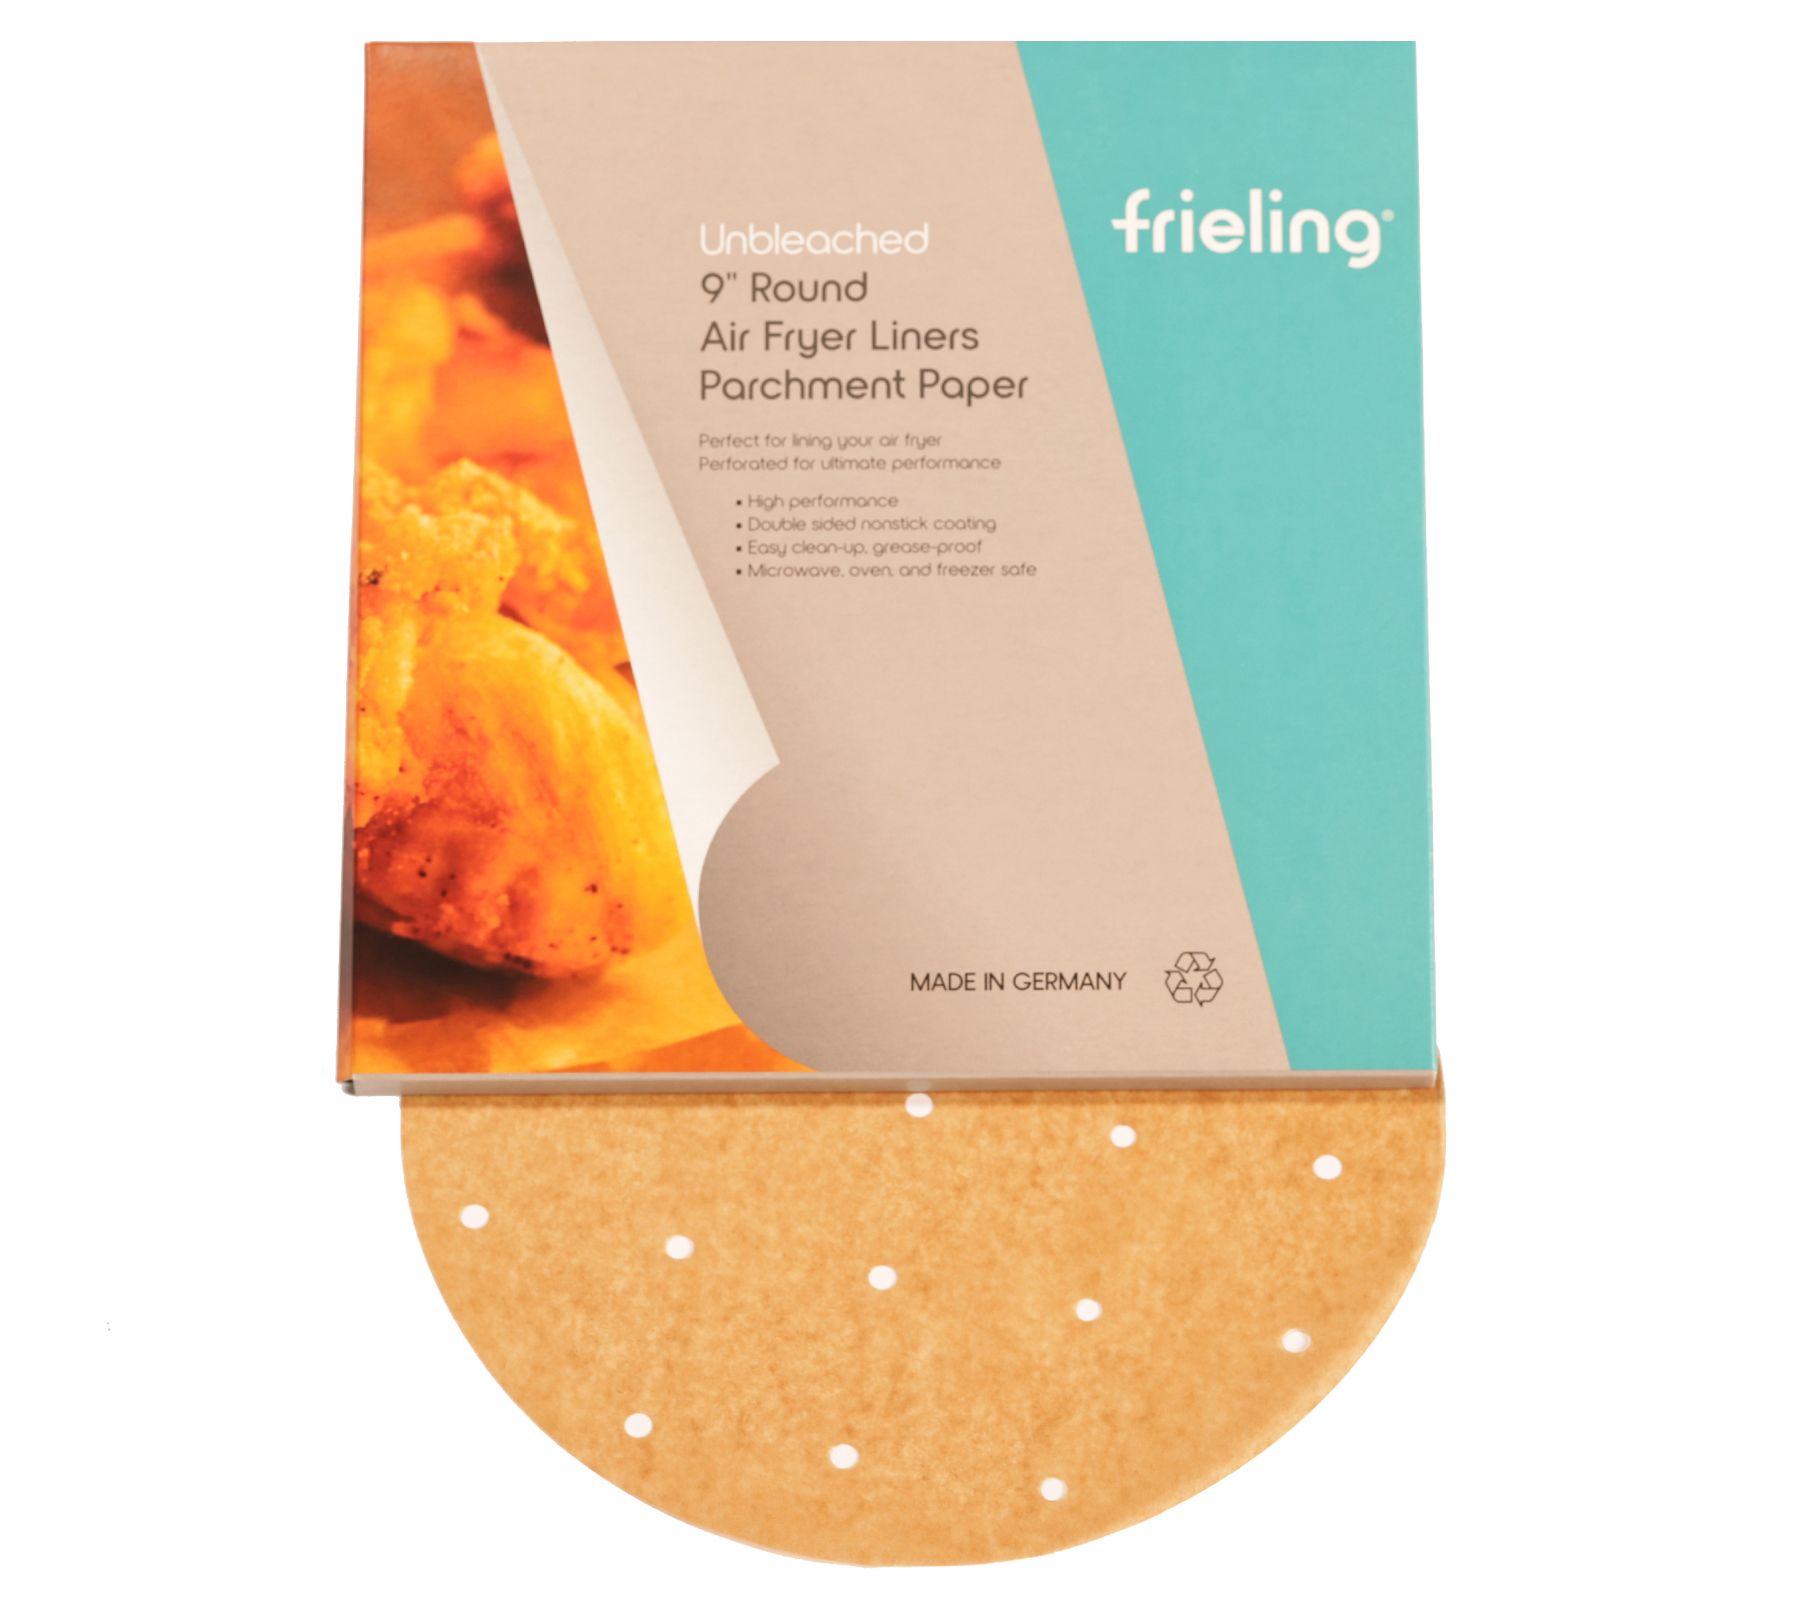 Frieling Pastry Cutter & Reviews